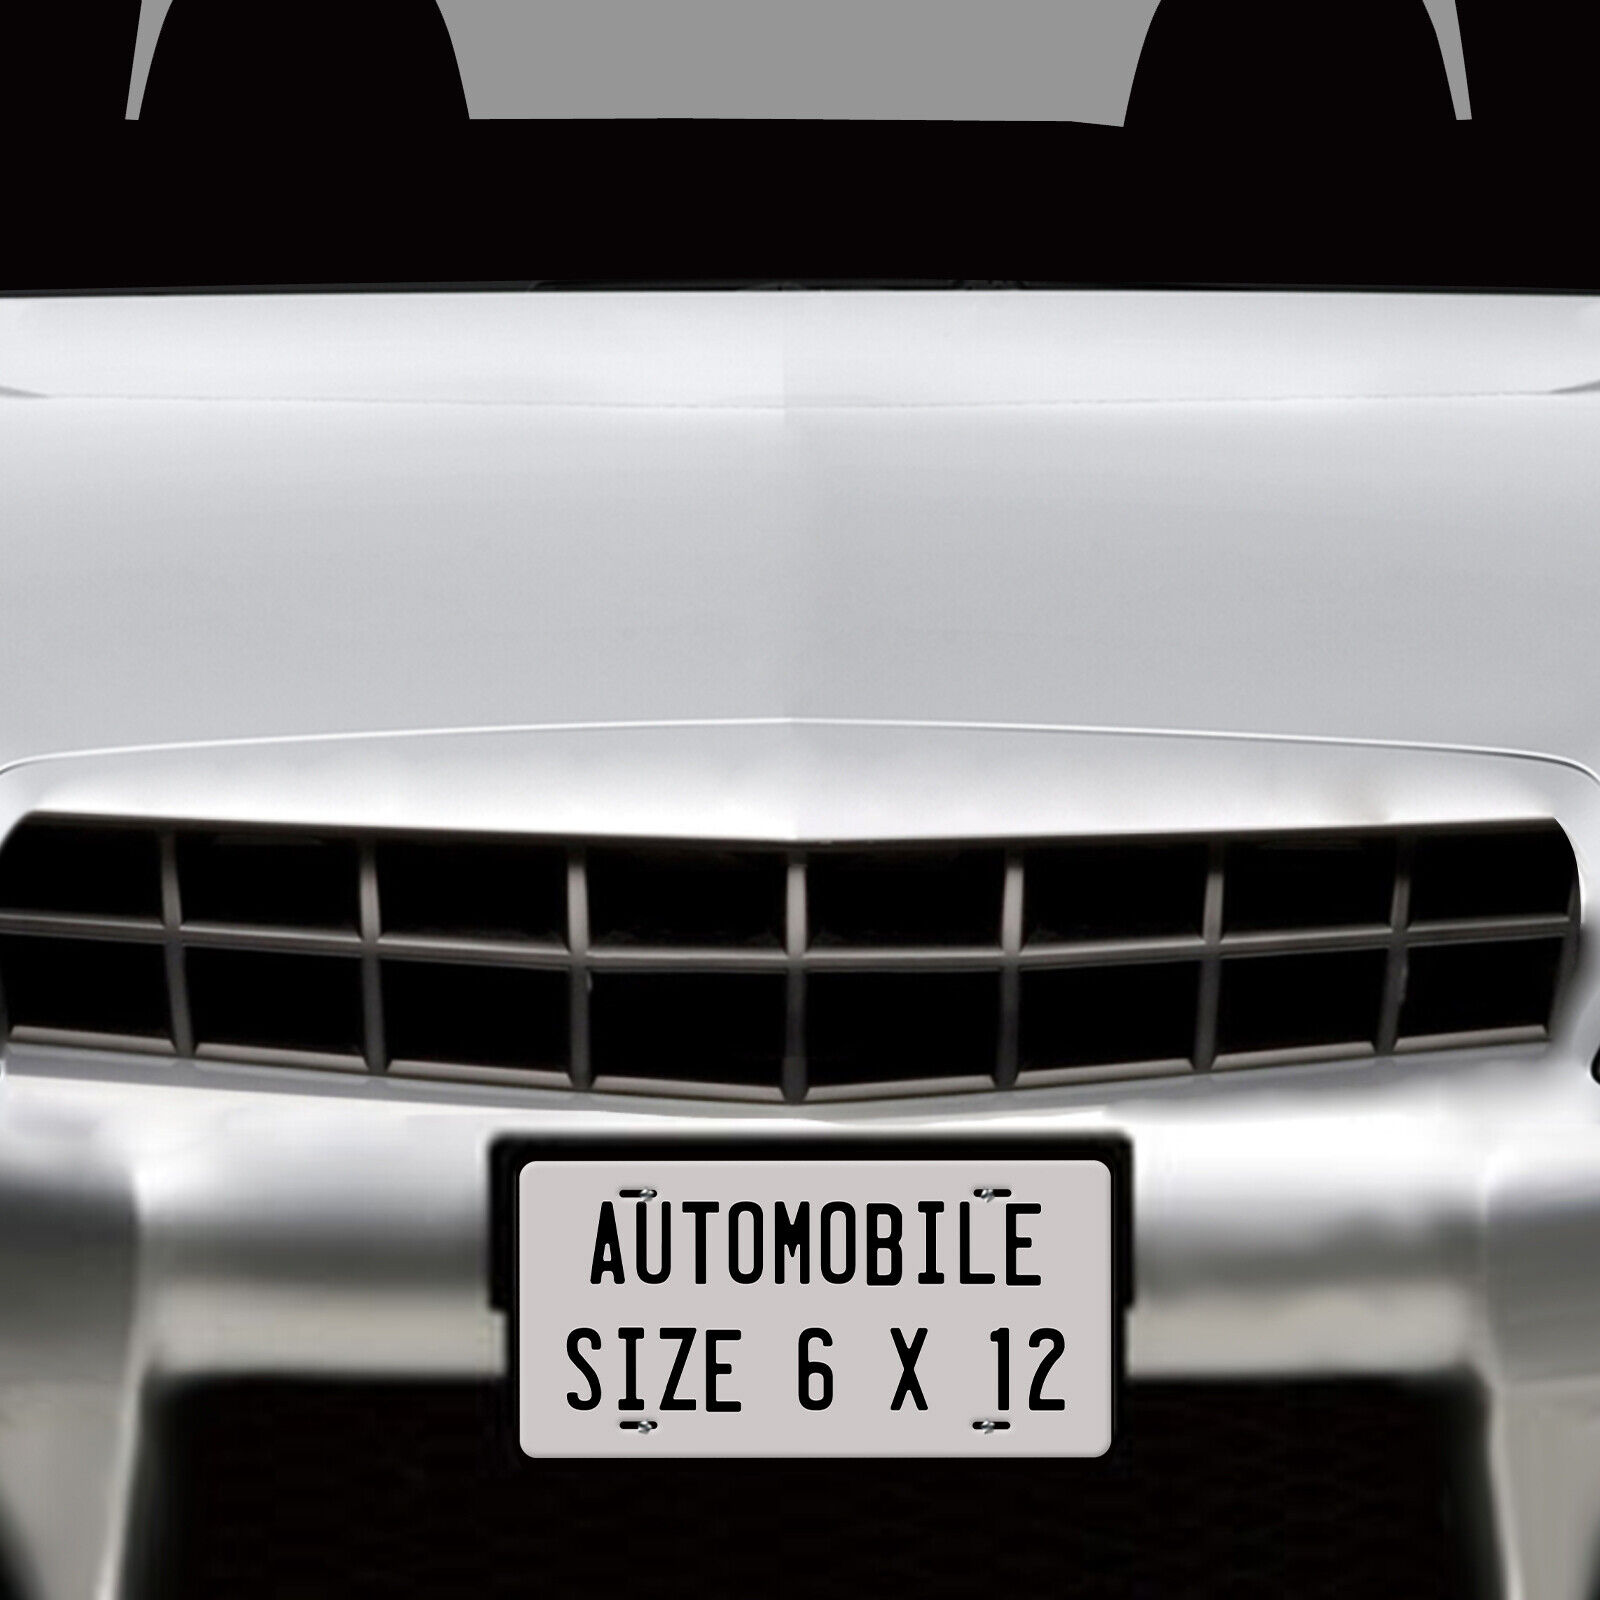 Any State Black and Silver Personalized Novelty Car Auto License Plate ATV Bike